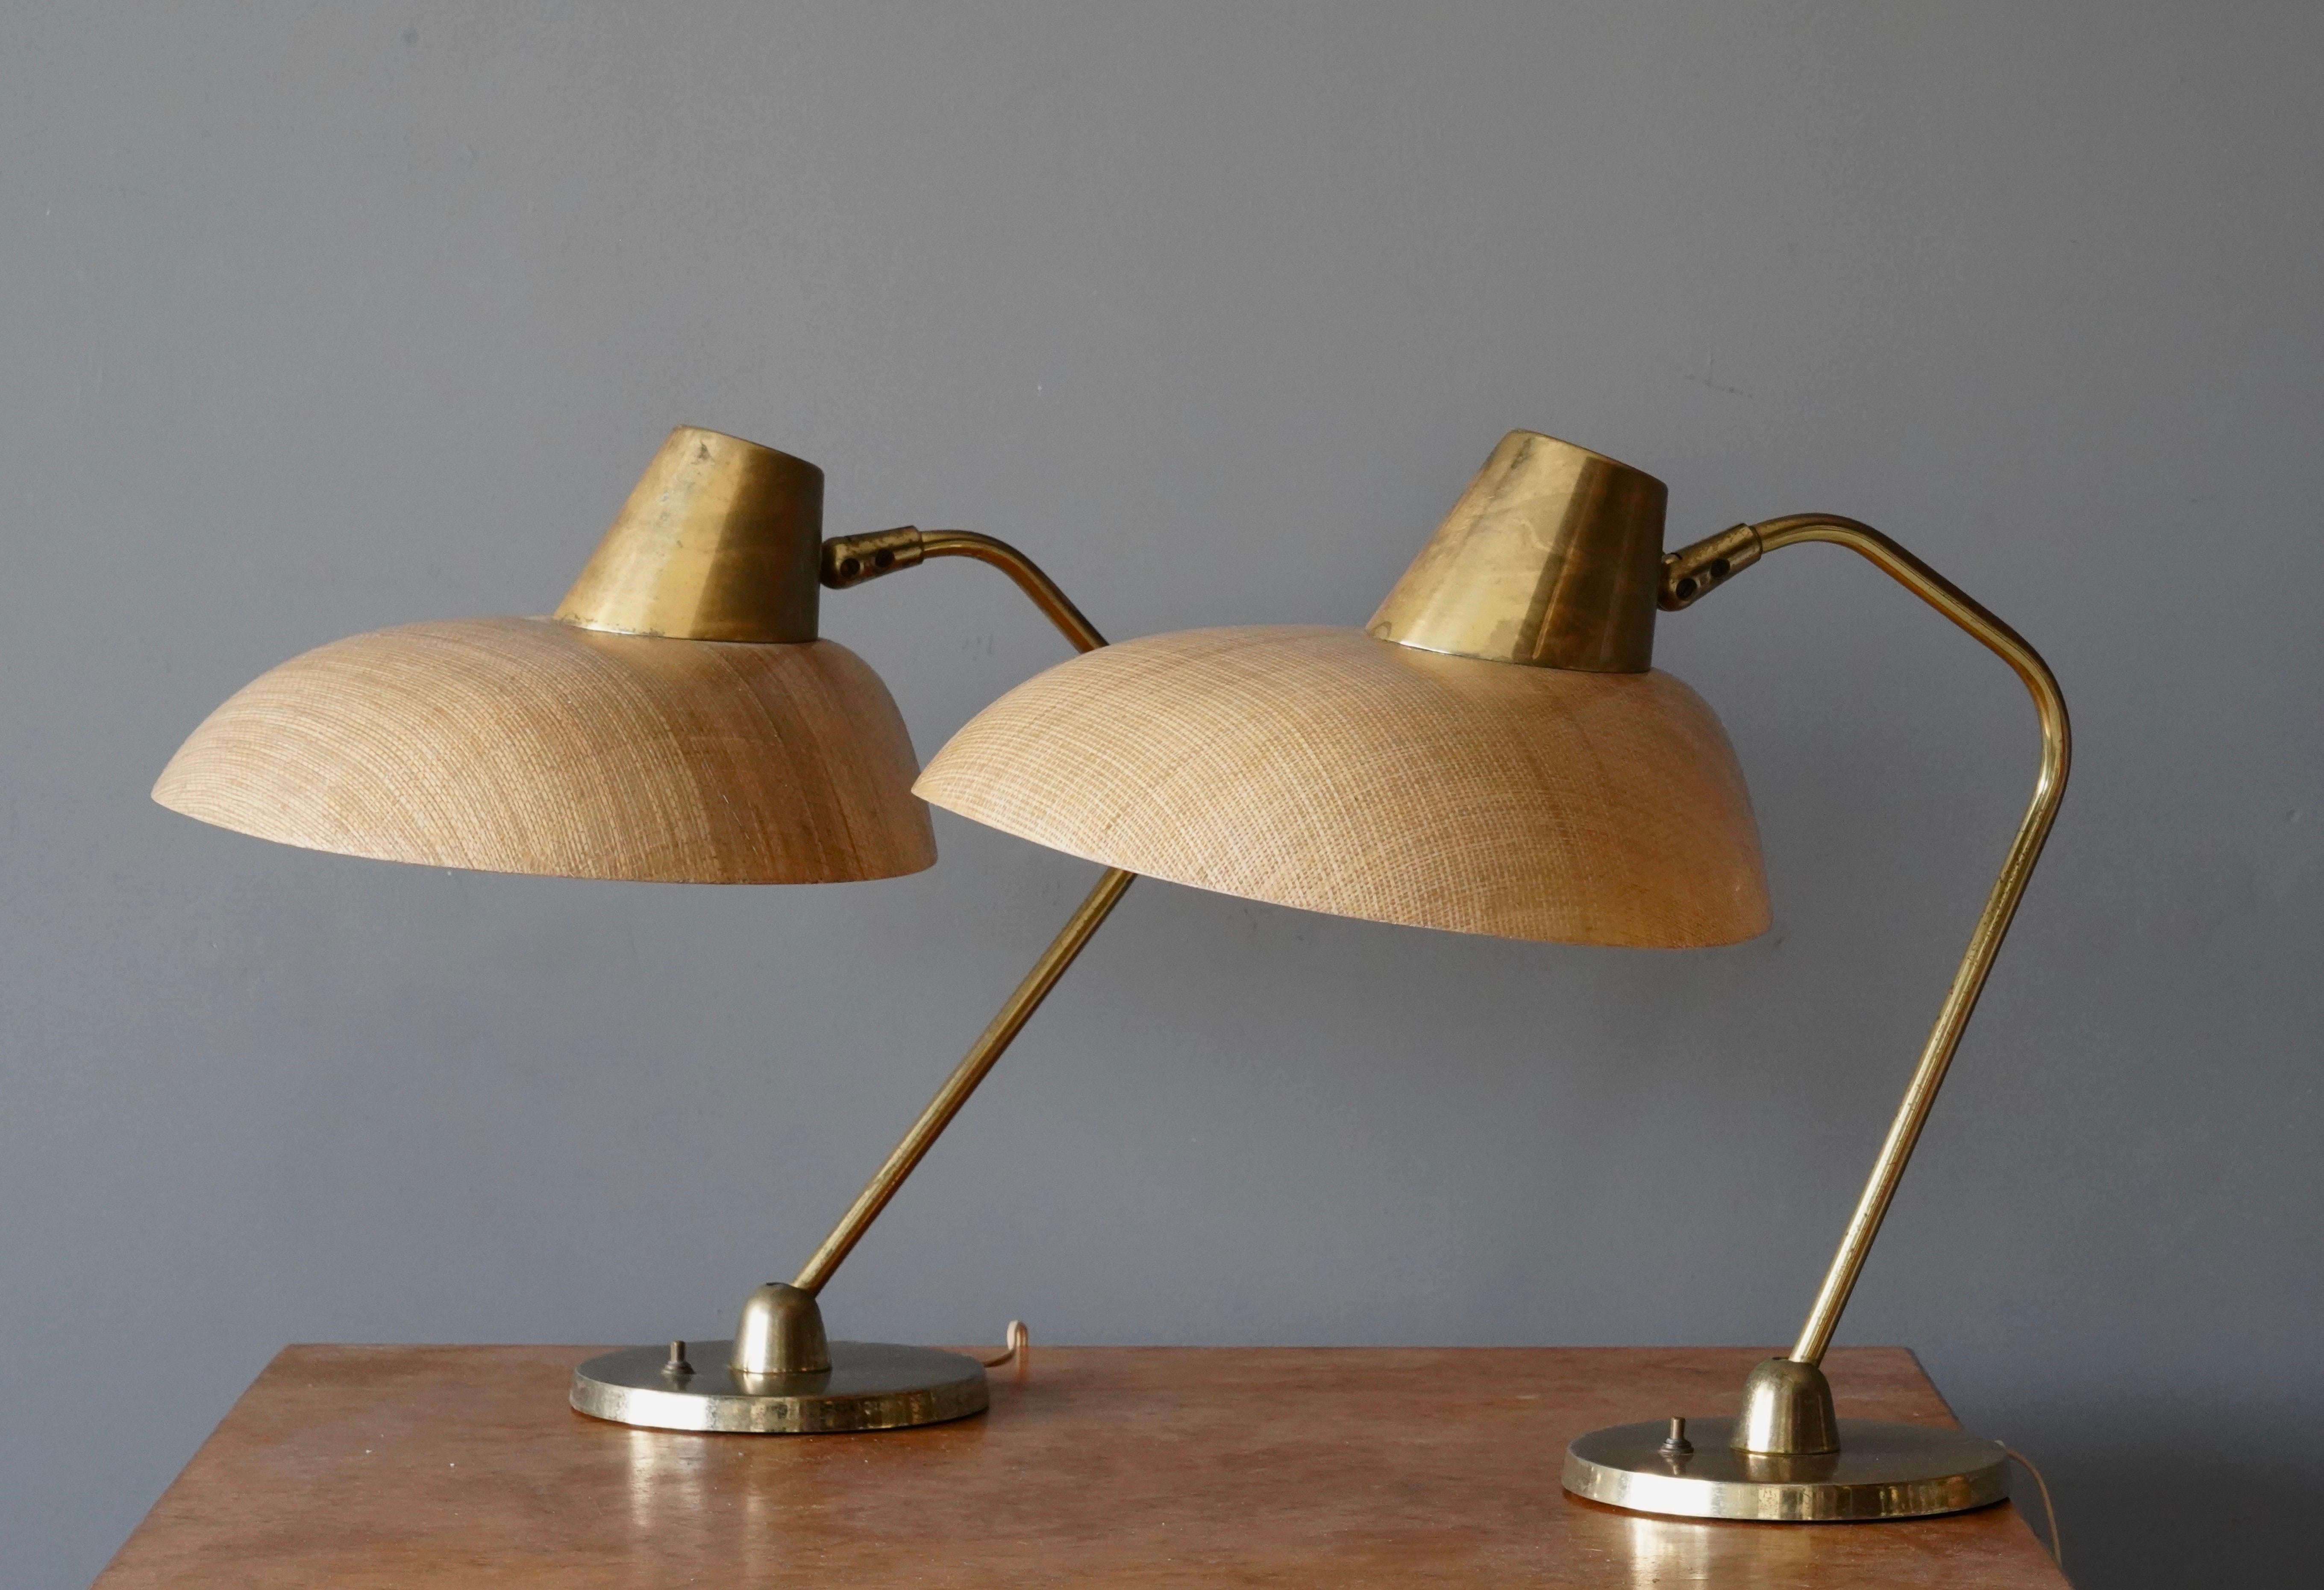 A pair of adjustable table lamps / desk lights. Features brass and original sizable lampshades in raffia and fiberglass. 

Takes one lightbulb on standard medium socket. No stated max wattage. 

Other designers of the period include Paavo